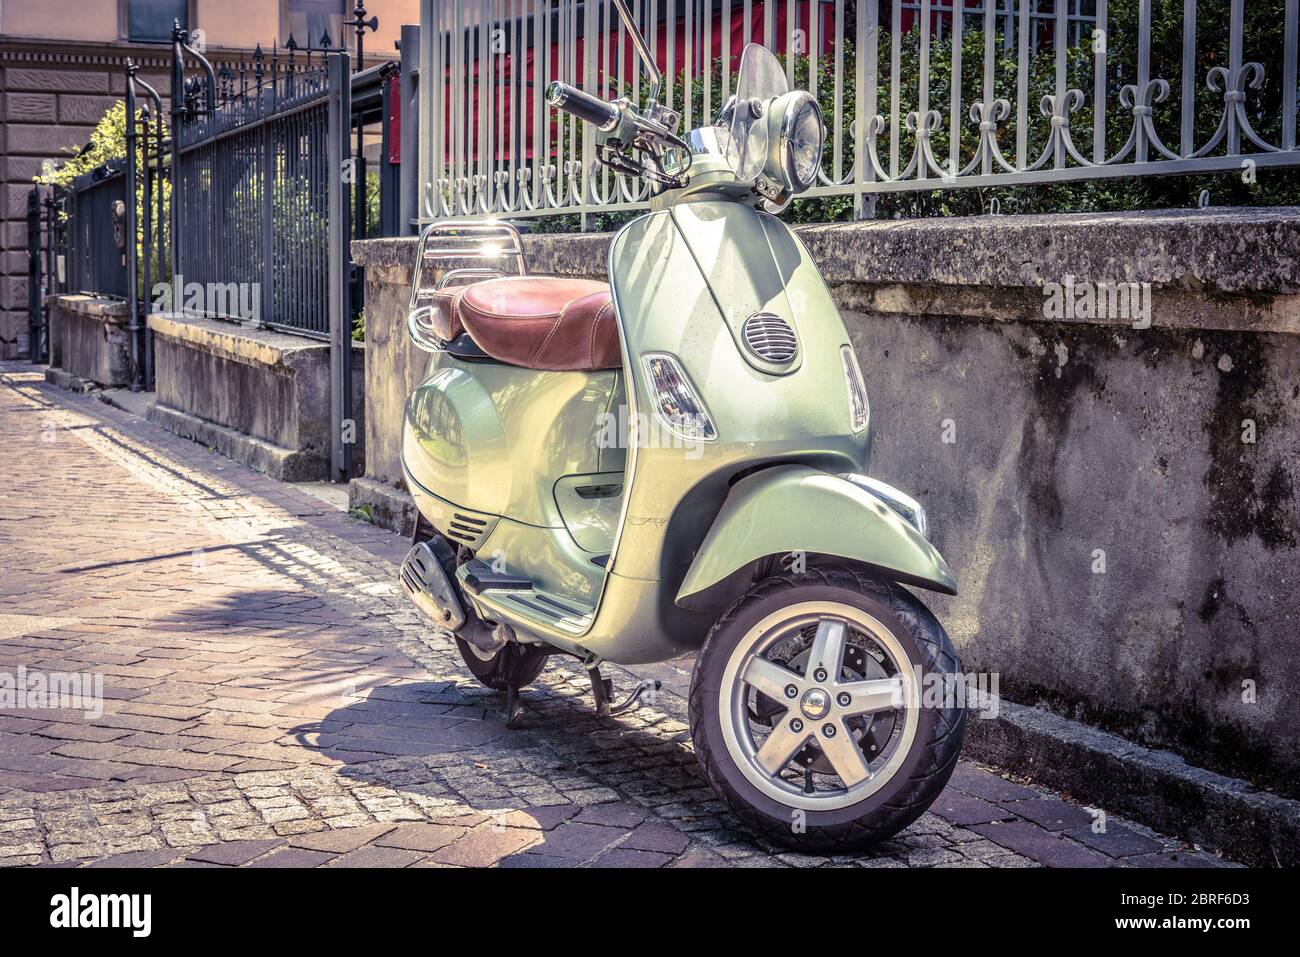 Scooter parked on an old street. Scooter or motorbike is one of the most popular transport in Europe. Vintage style photo. City scene with green retro Stock Photo